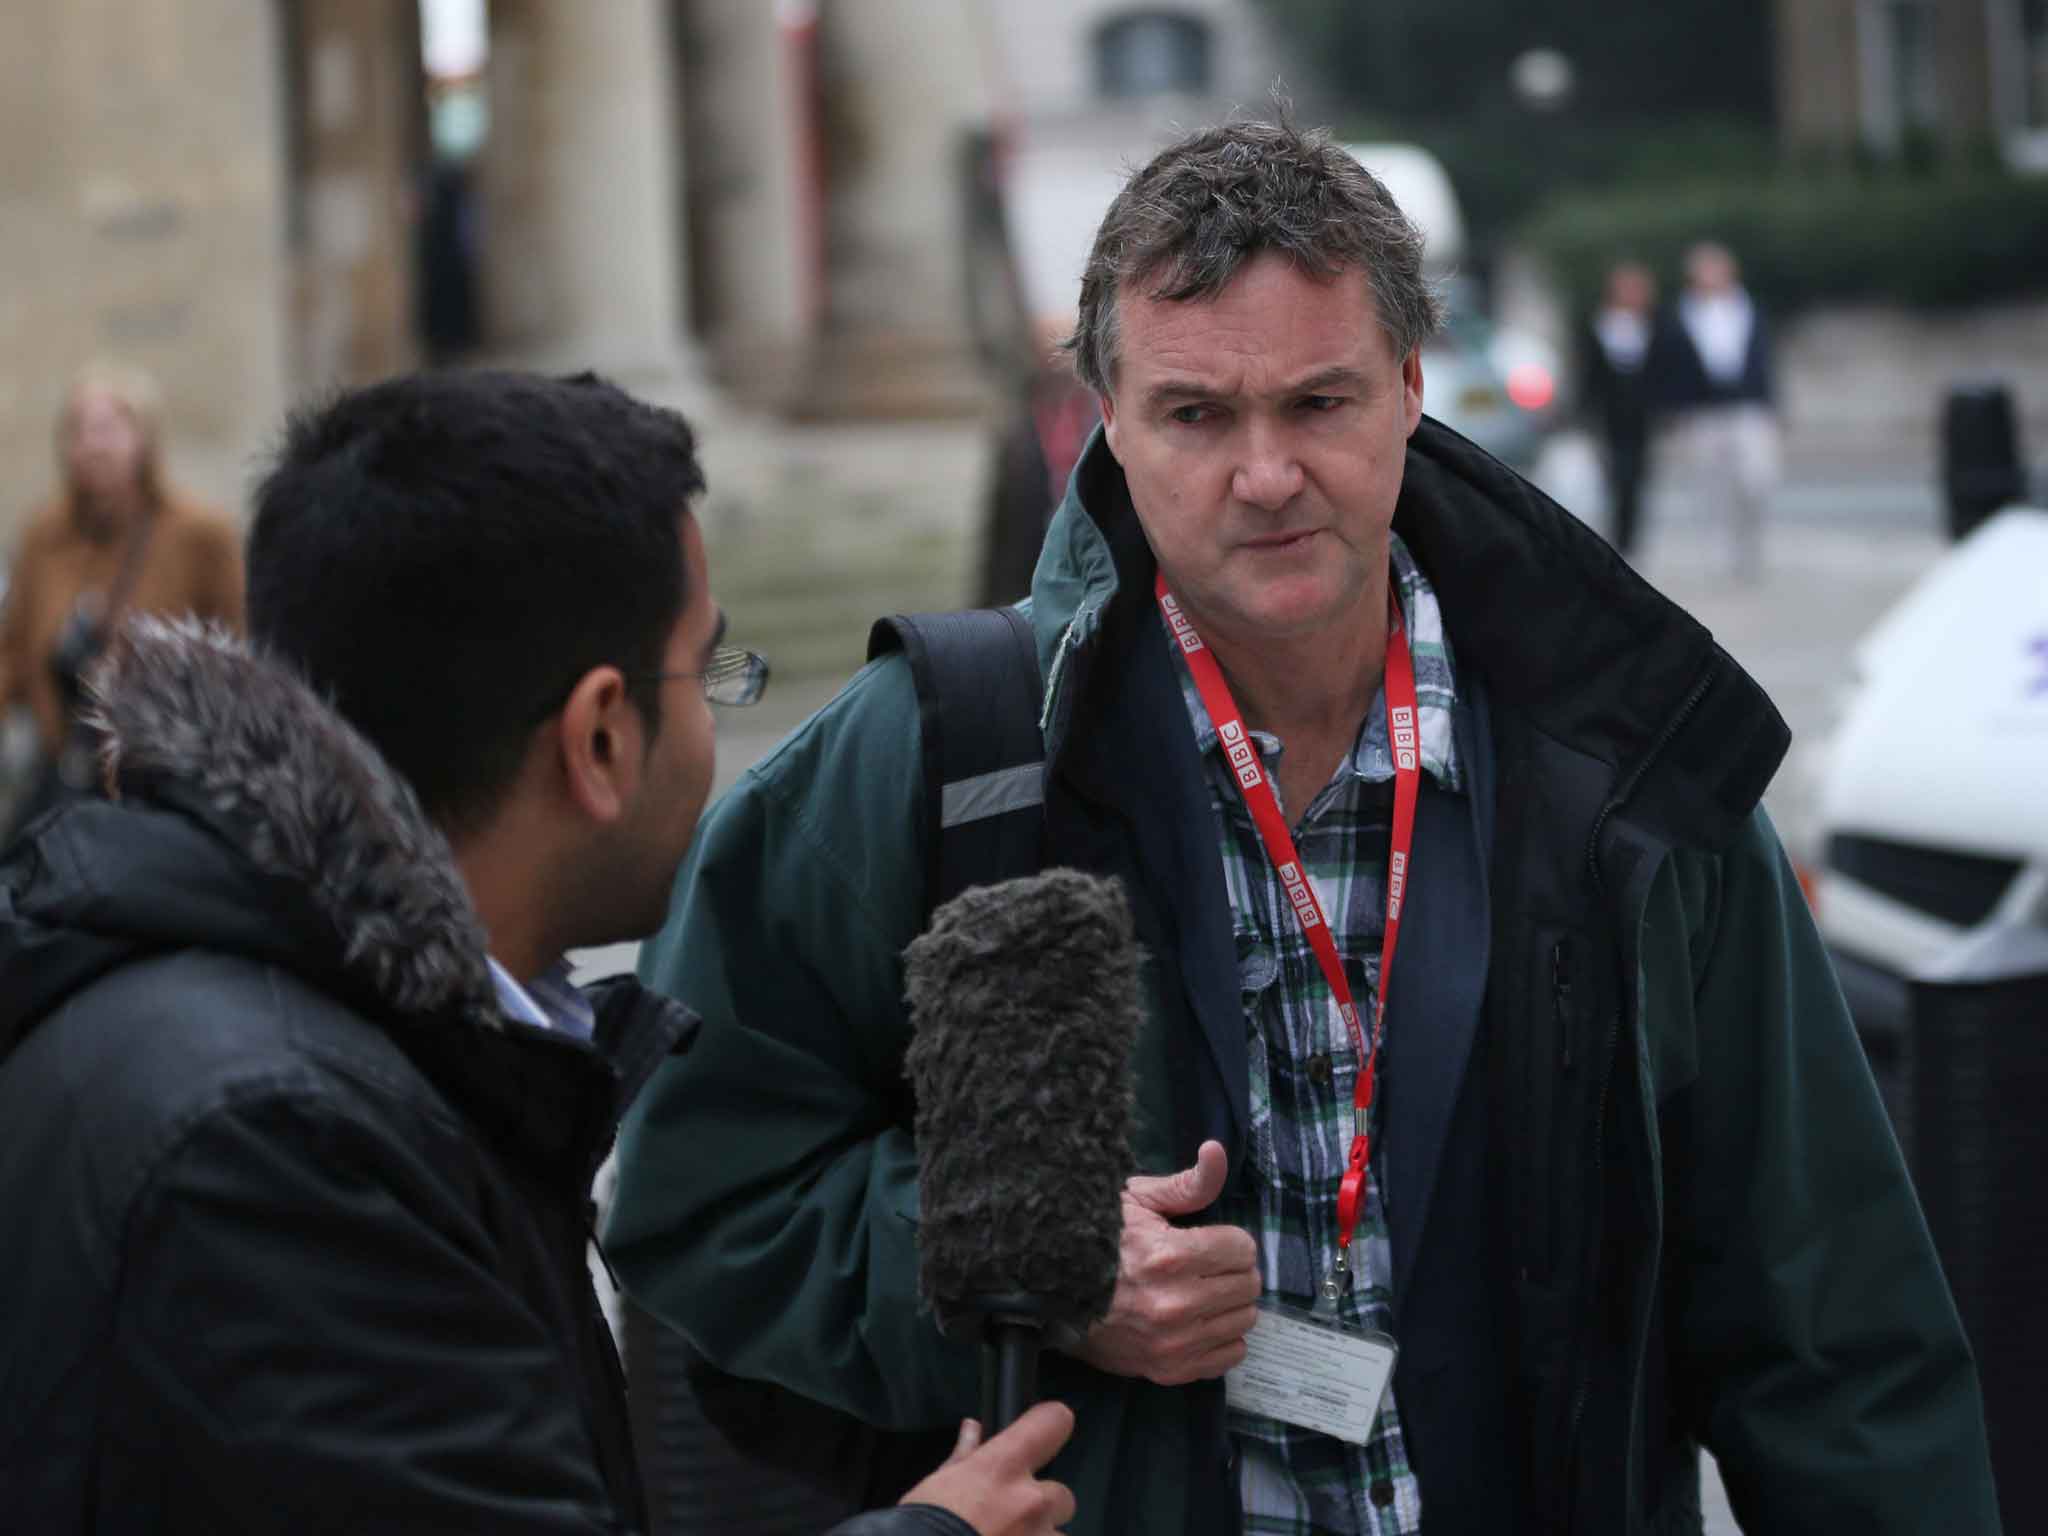 Meirion Jones, a former ‘Newsnight’ producer, whose 2011 investigation into Jimmy Savile was spiked by the BBC